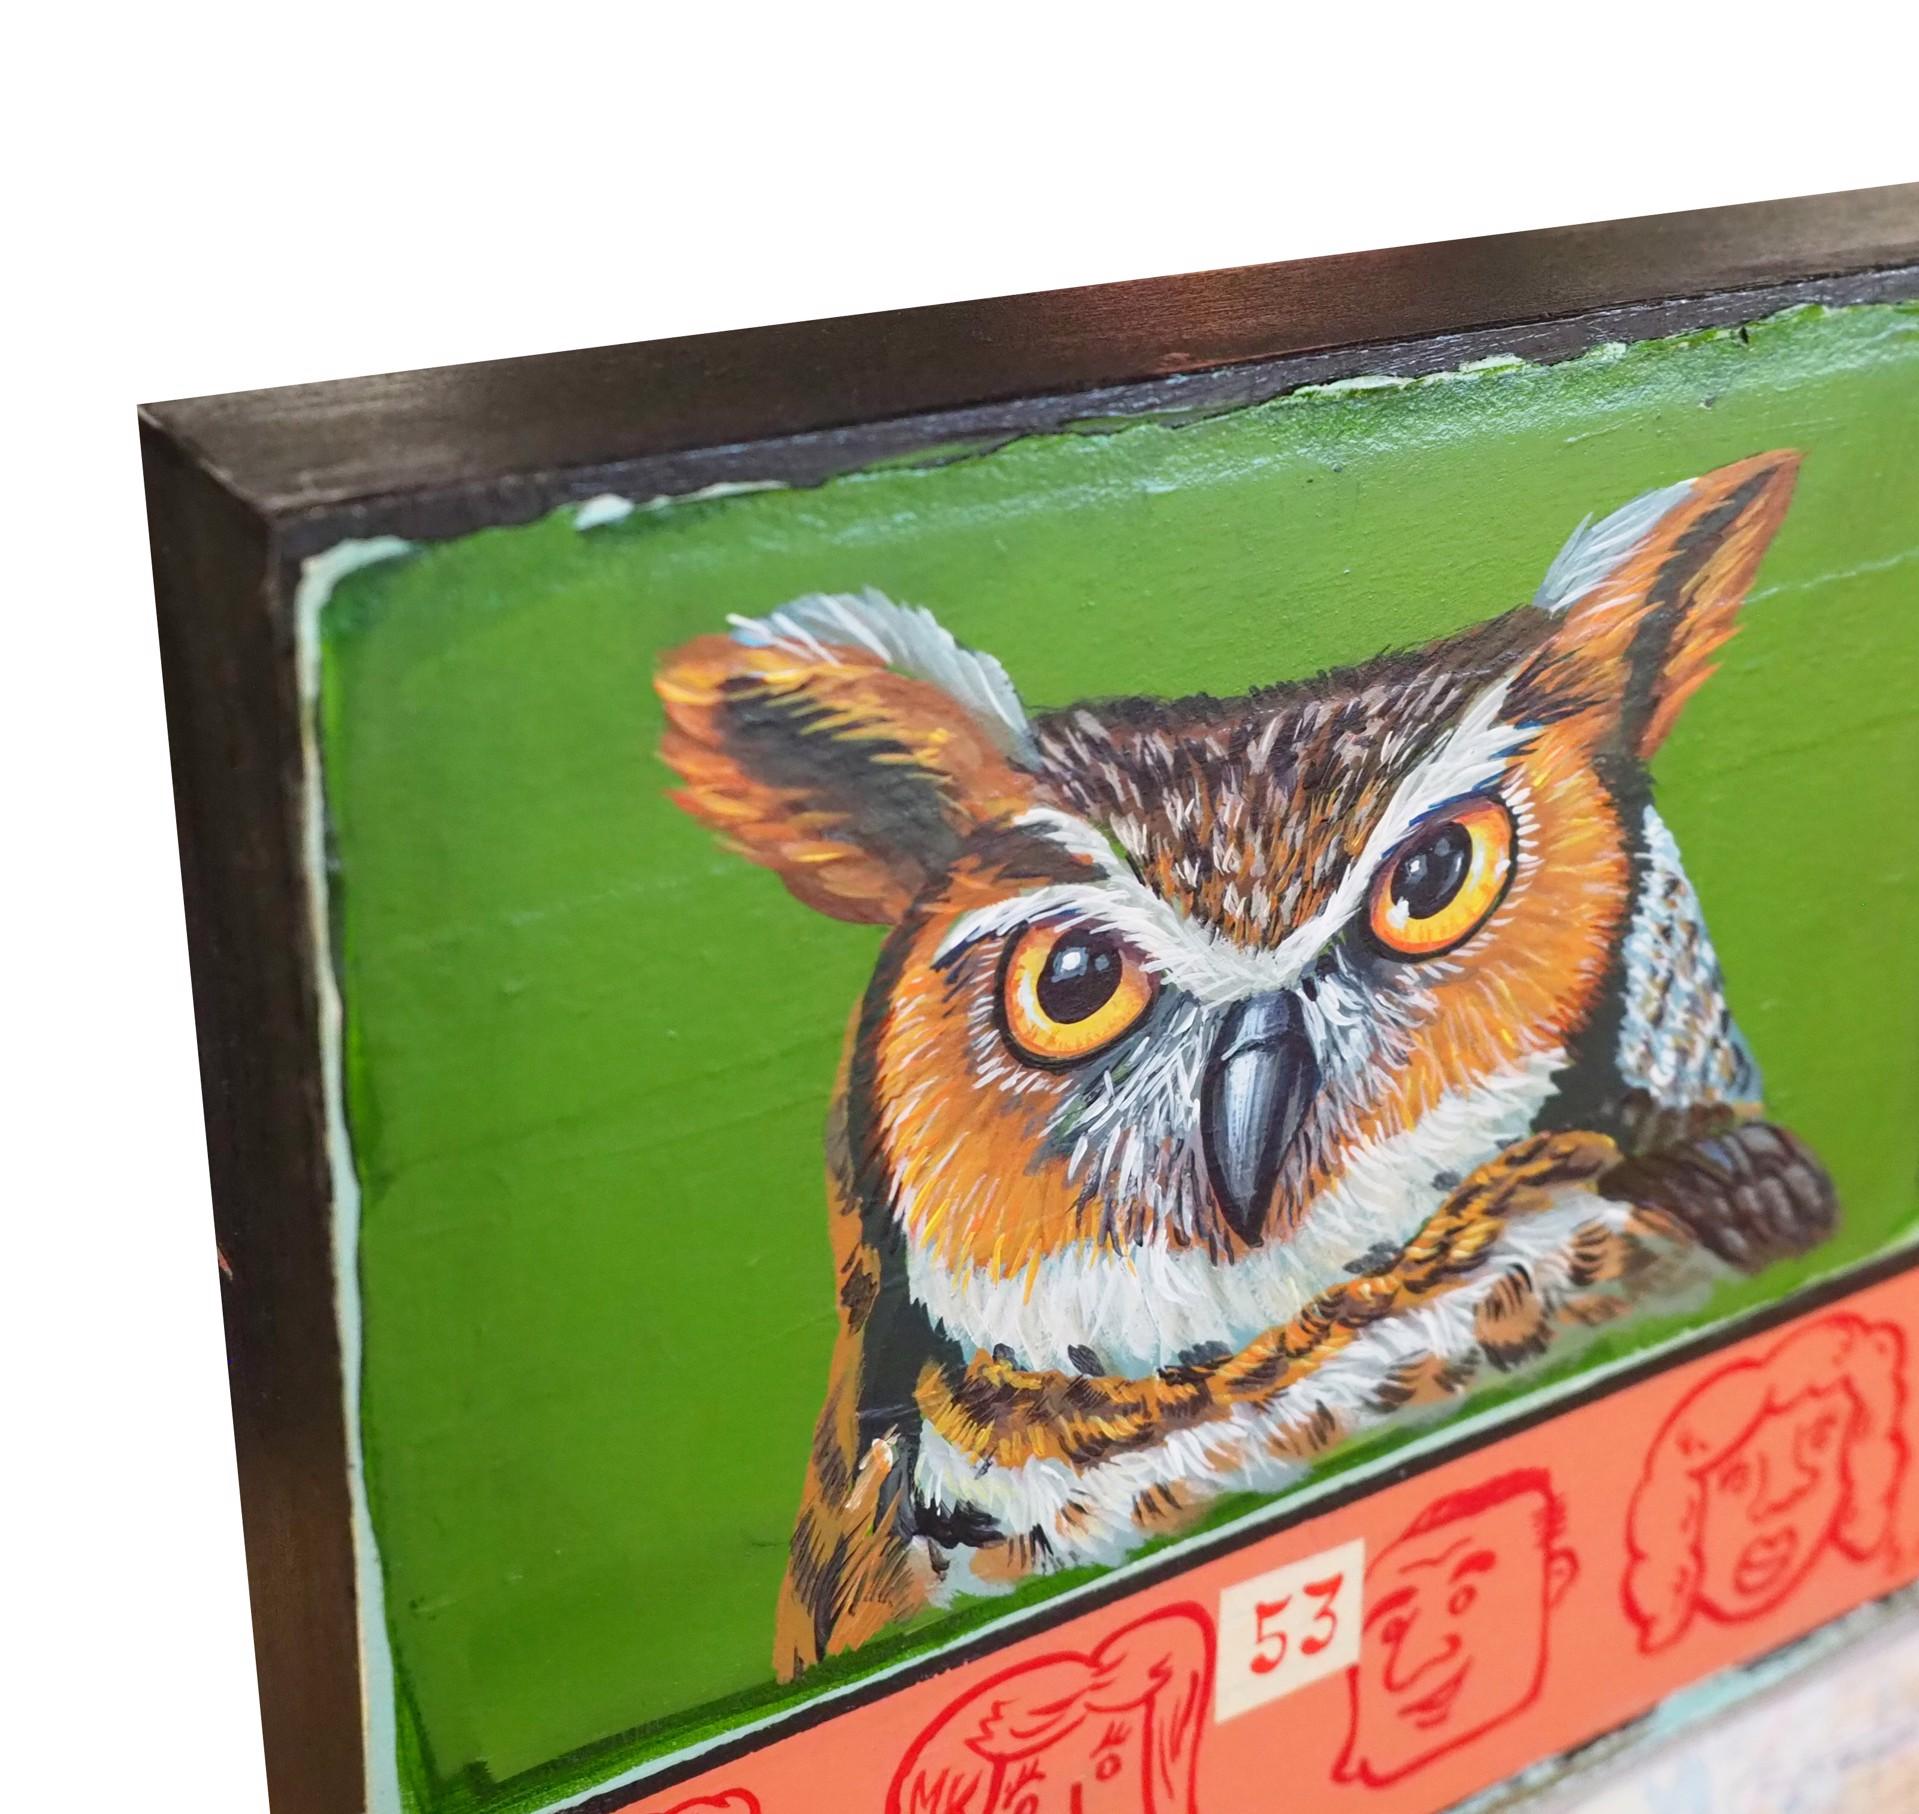 A Familiar Face at The Corner Store portrays an owl, two crows, a blue bird and a red cardinal. Each of the birds have their own squared background. A long red monochromatic rectangles runs horizontal in the composition containing cartoon faces. Tim